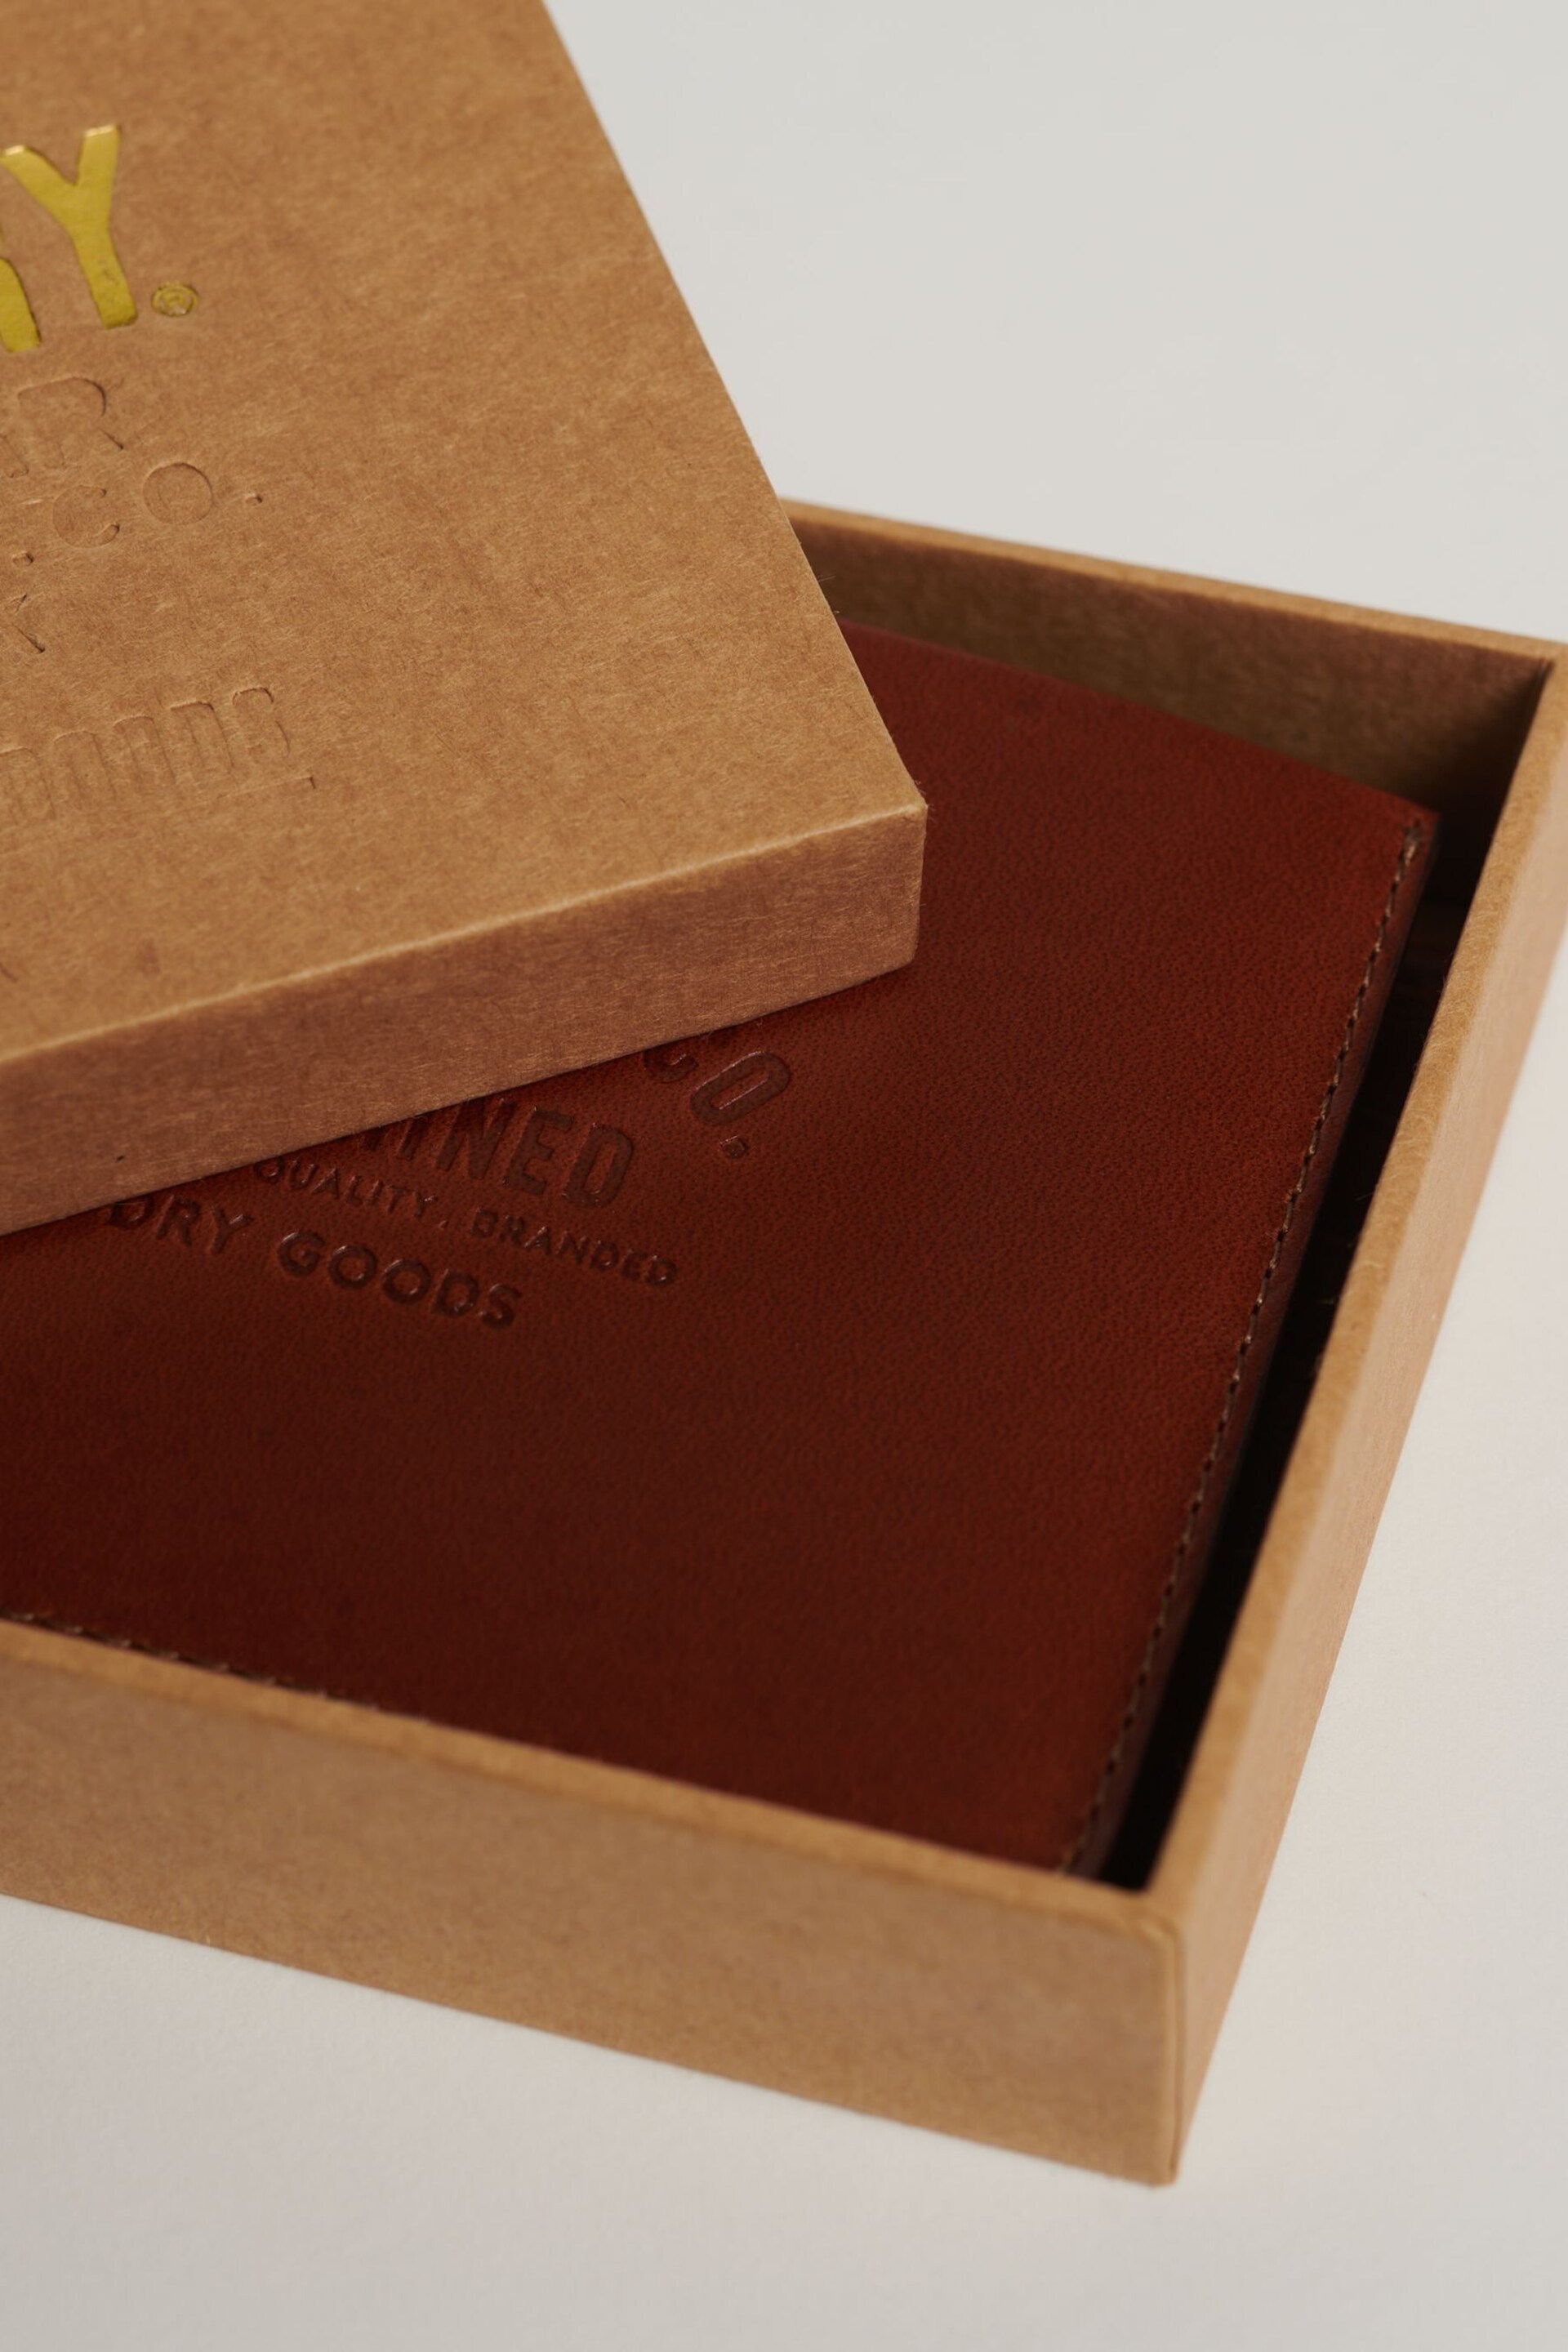 Superdry Brown Leather Wallet In Box - Image 6 of 6